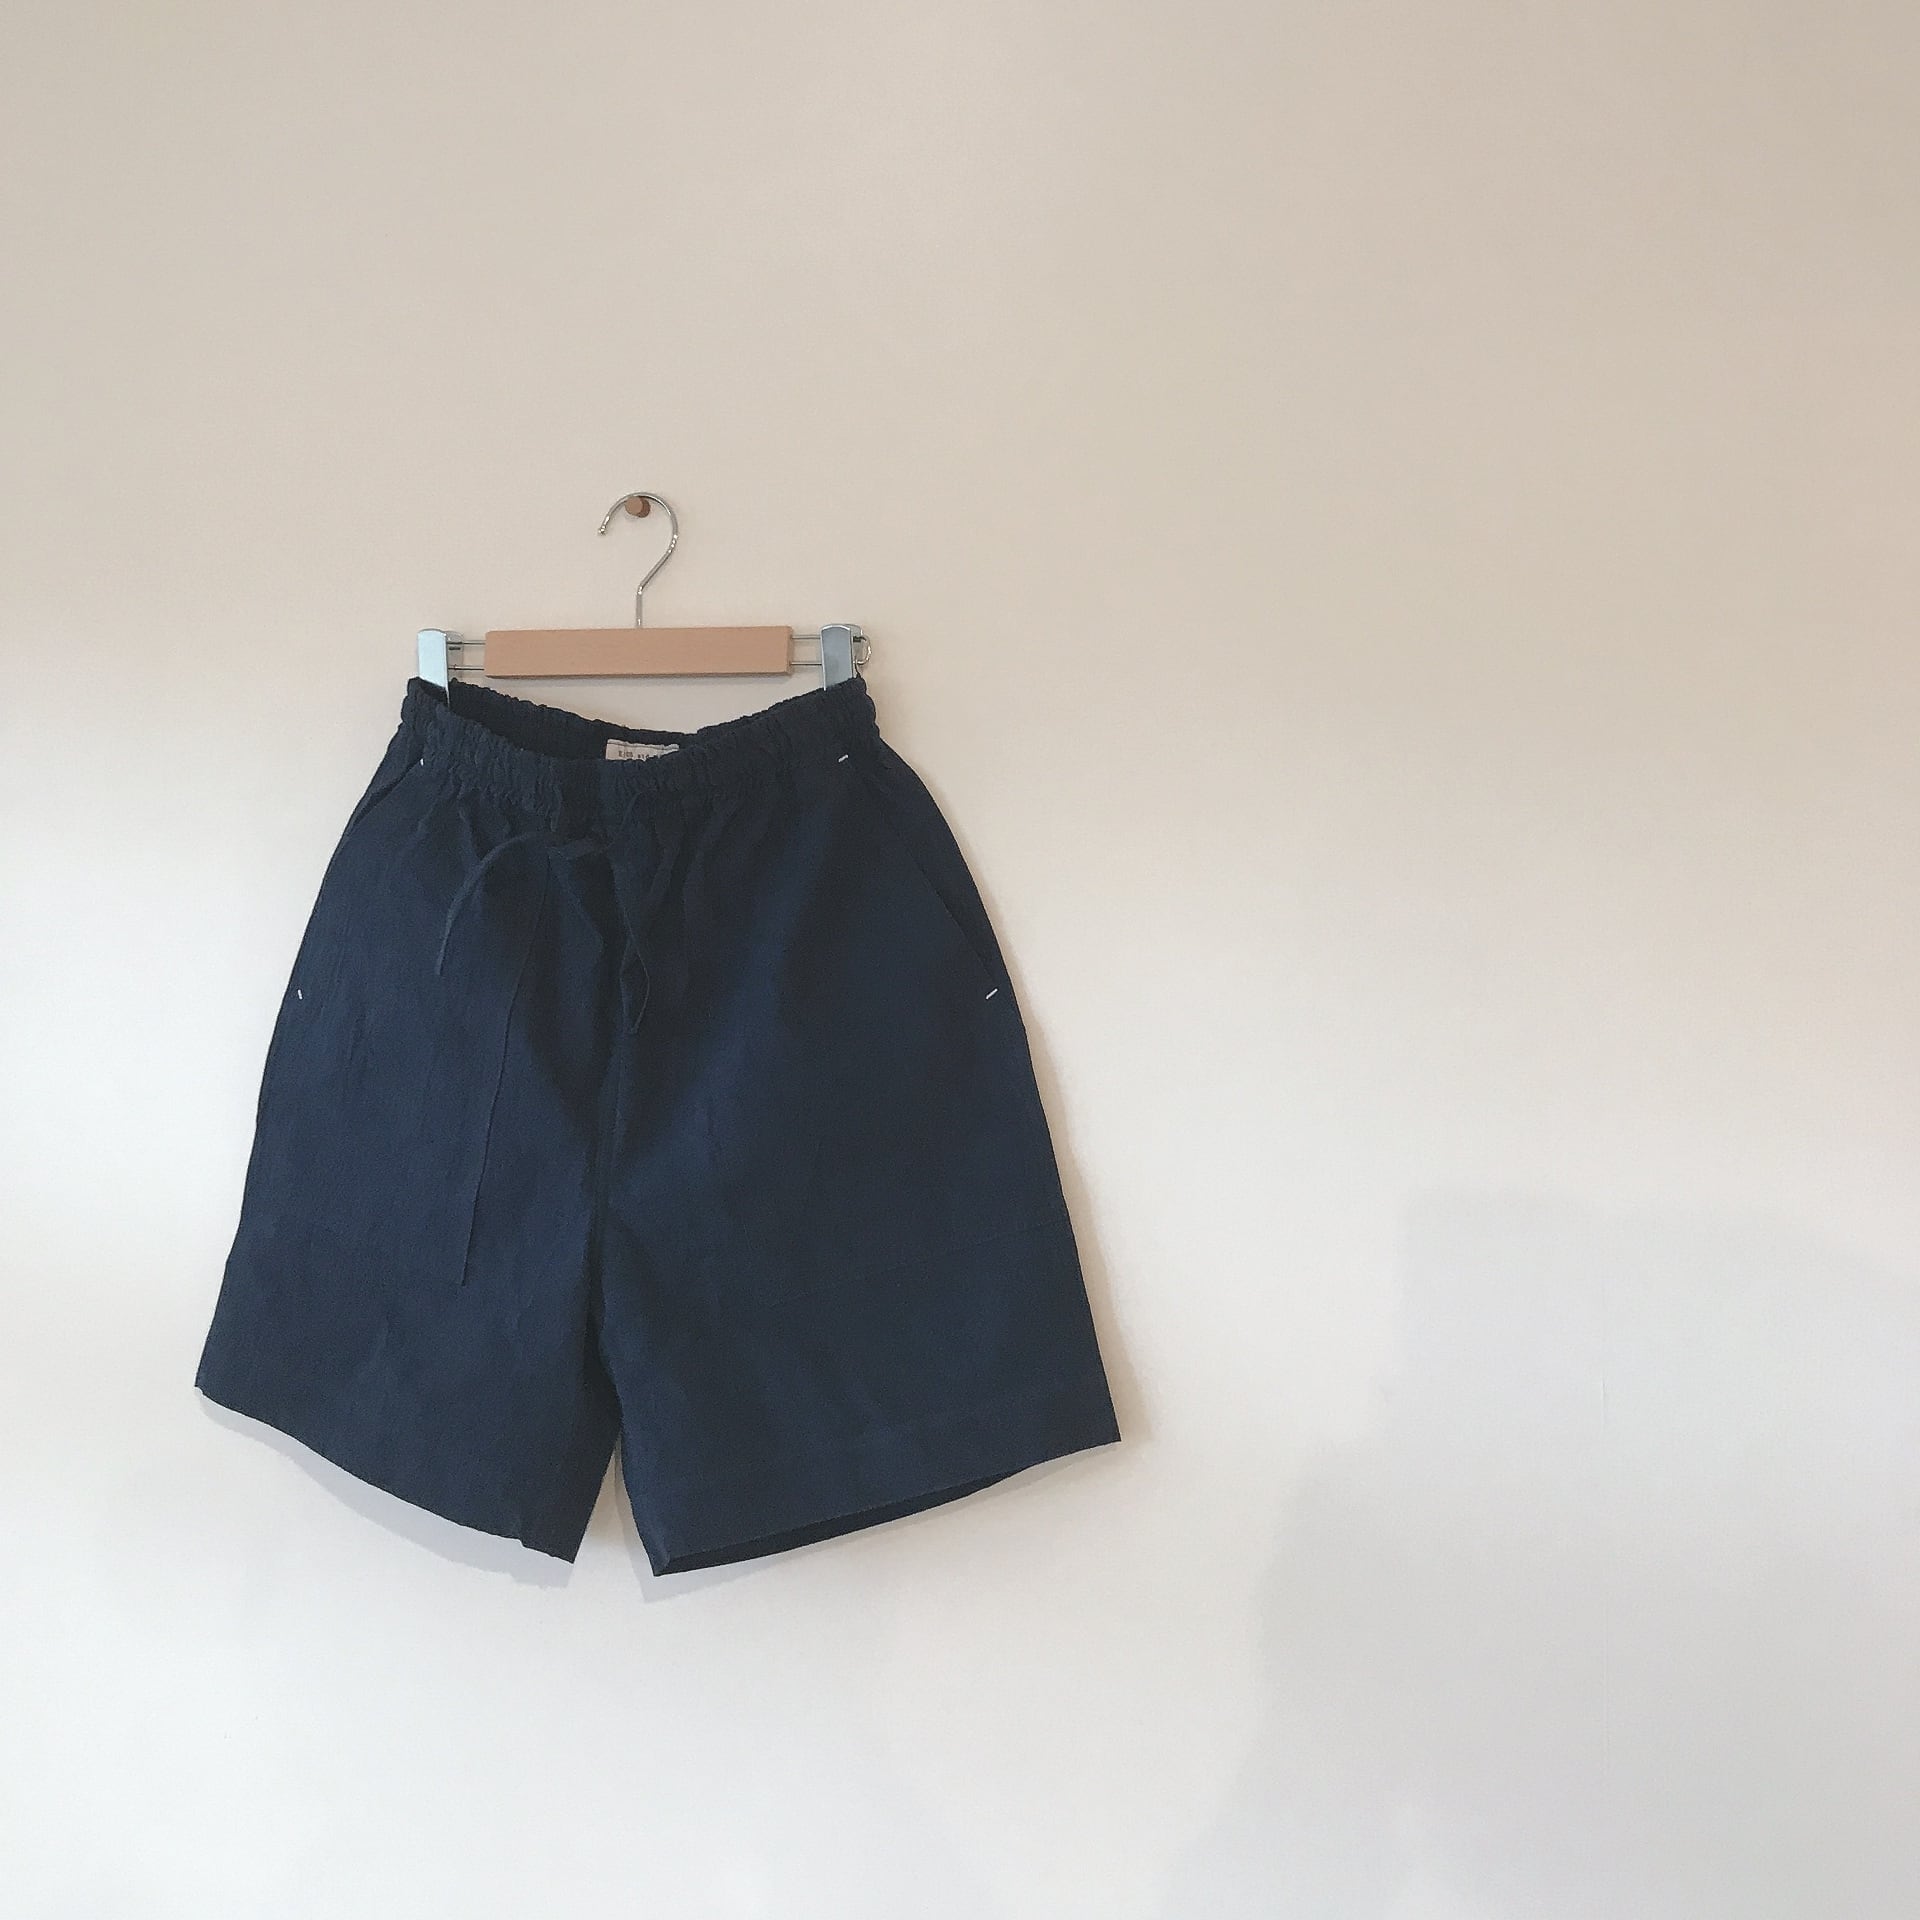 ENDS AND MEANS 13SS Easy Baker Shorts